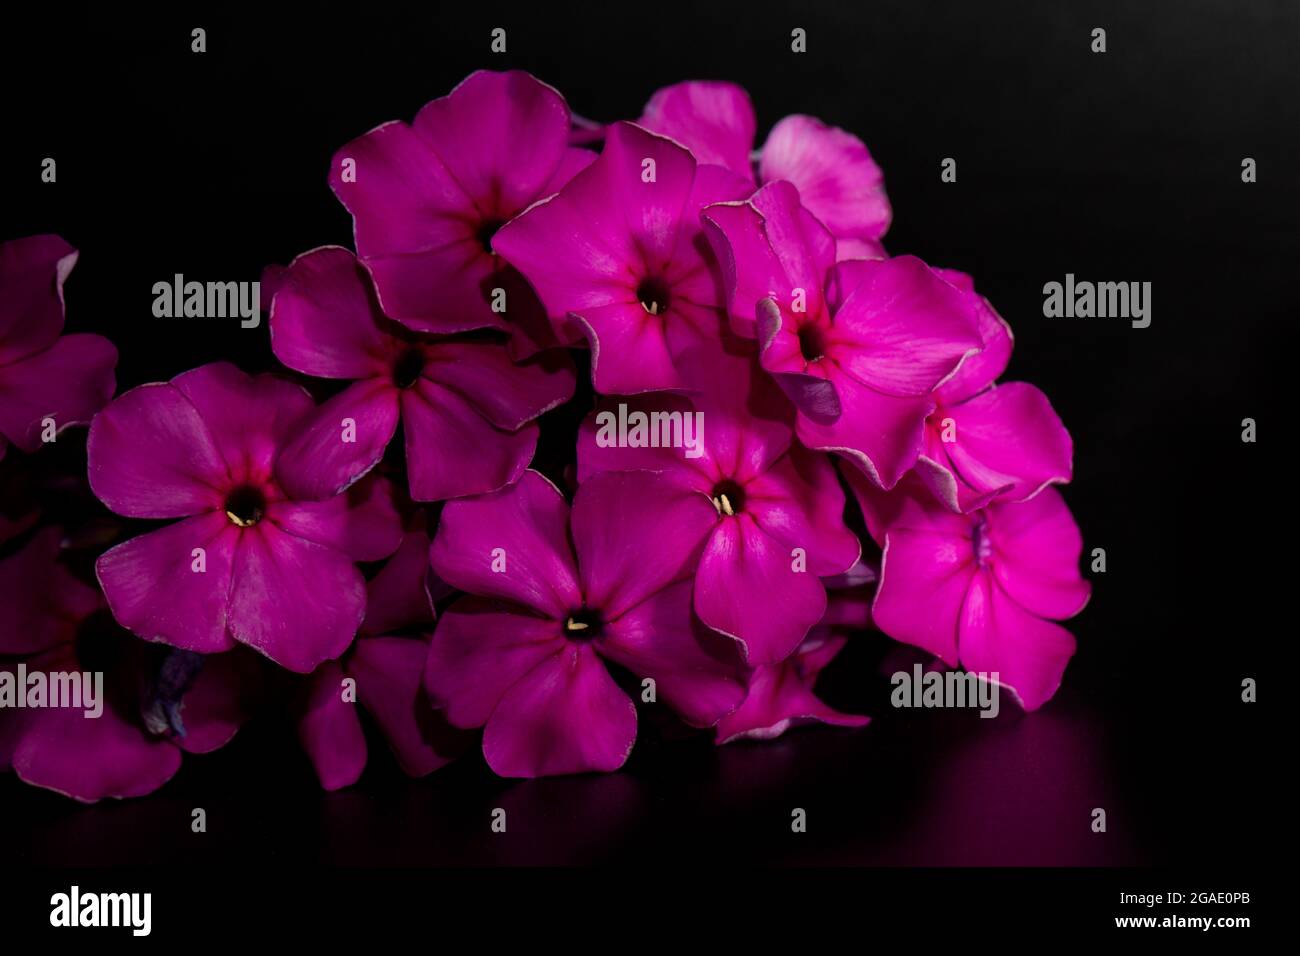 Purple or pink flowers of phlox paniculata on a black background. The poster. Stock Photo